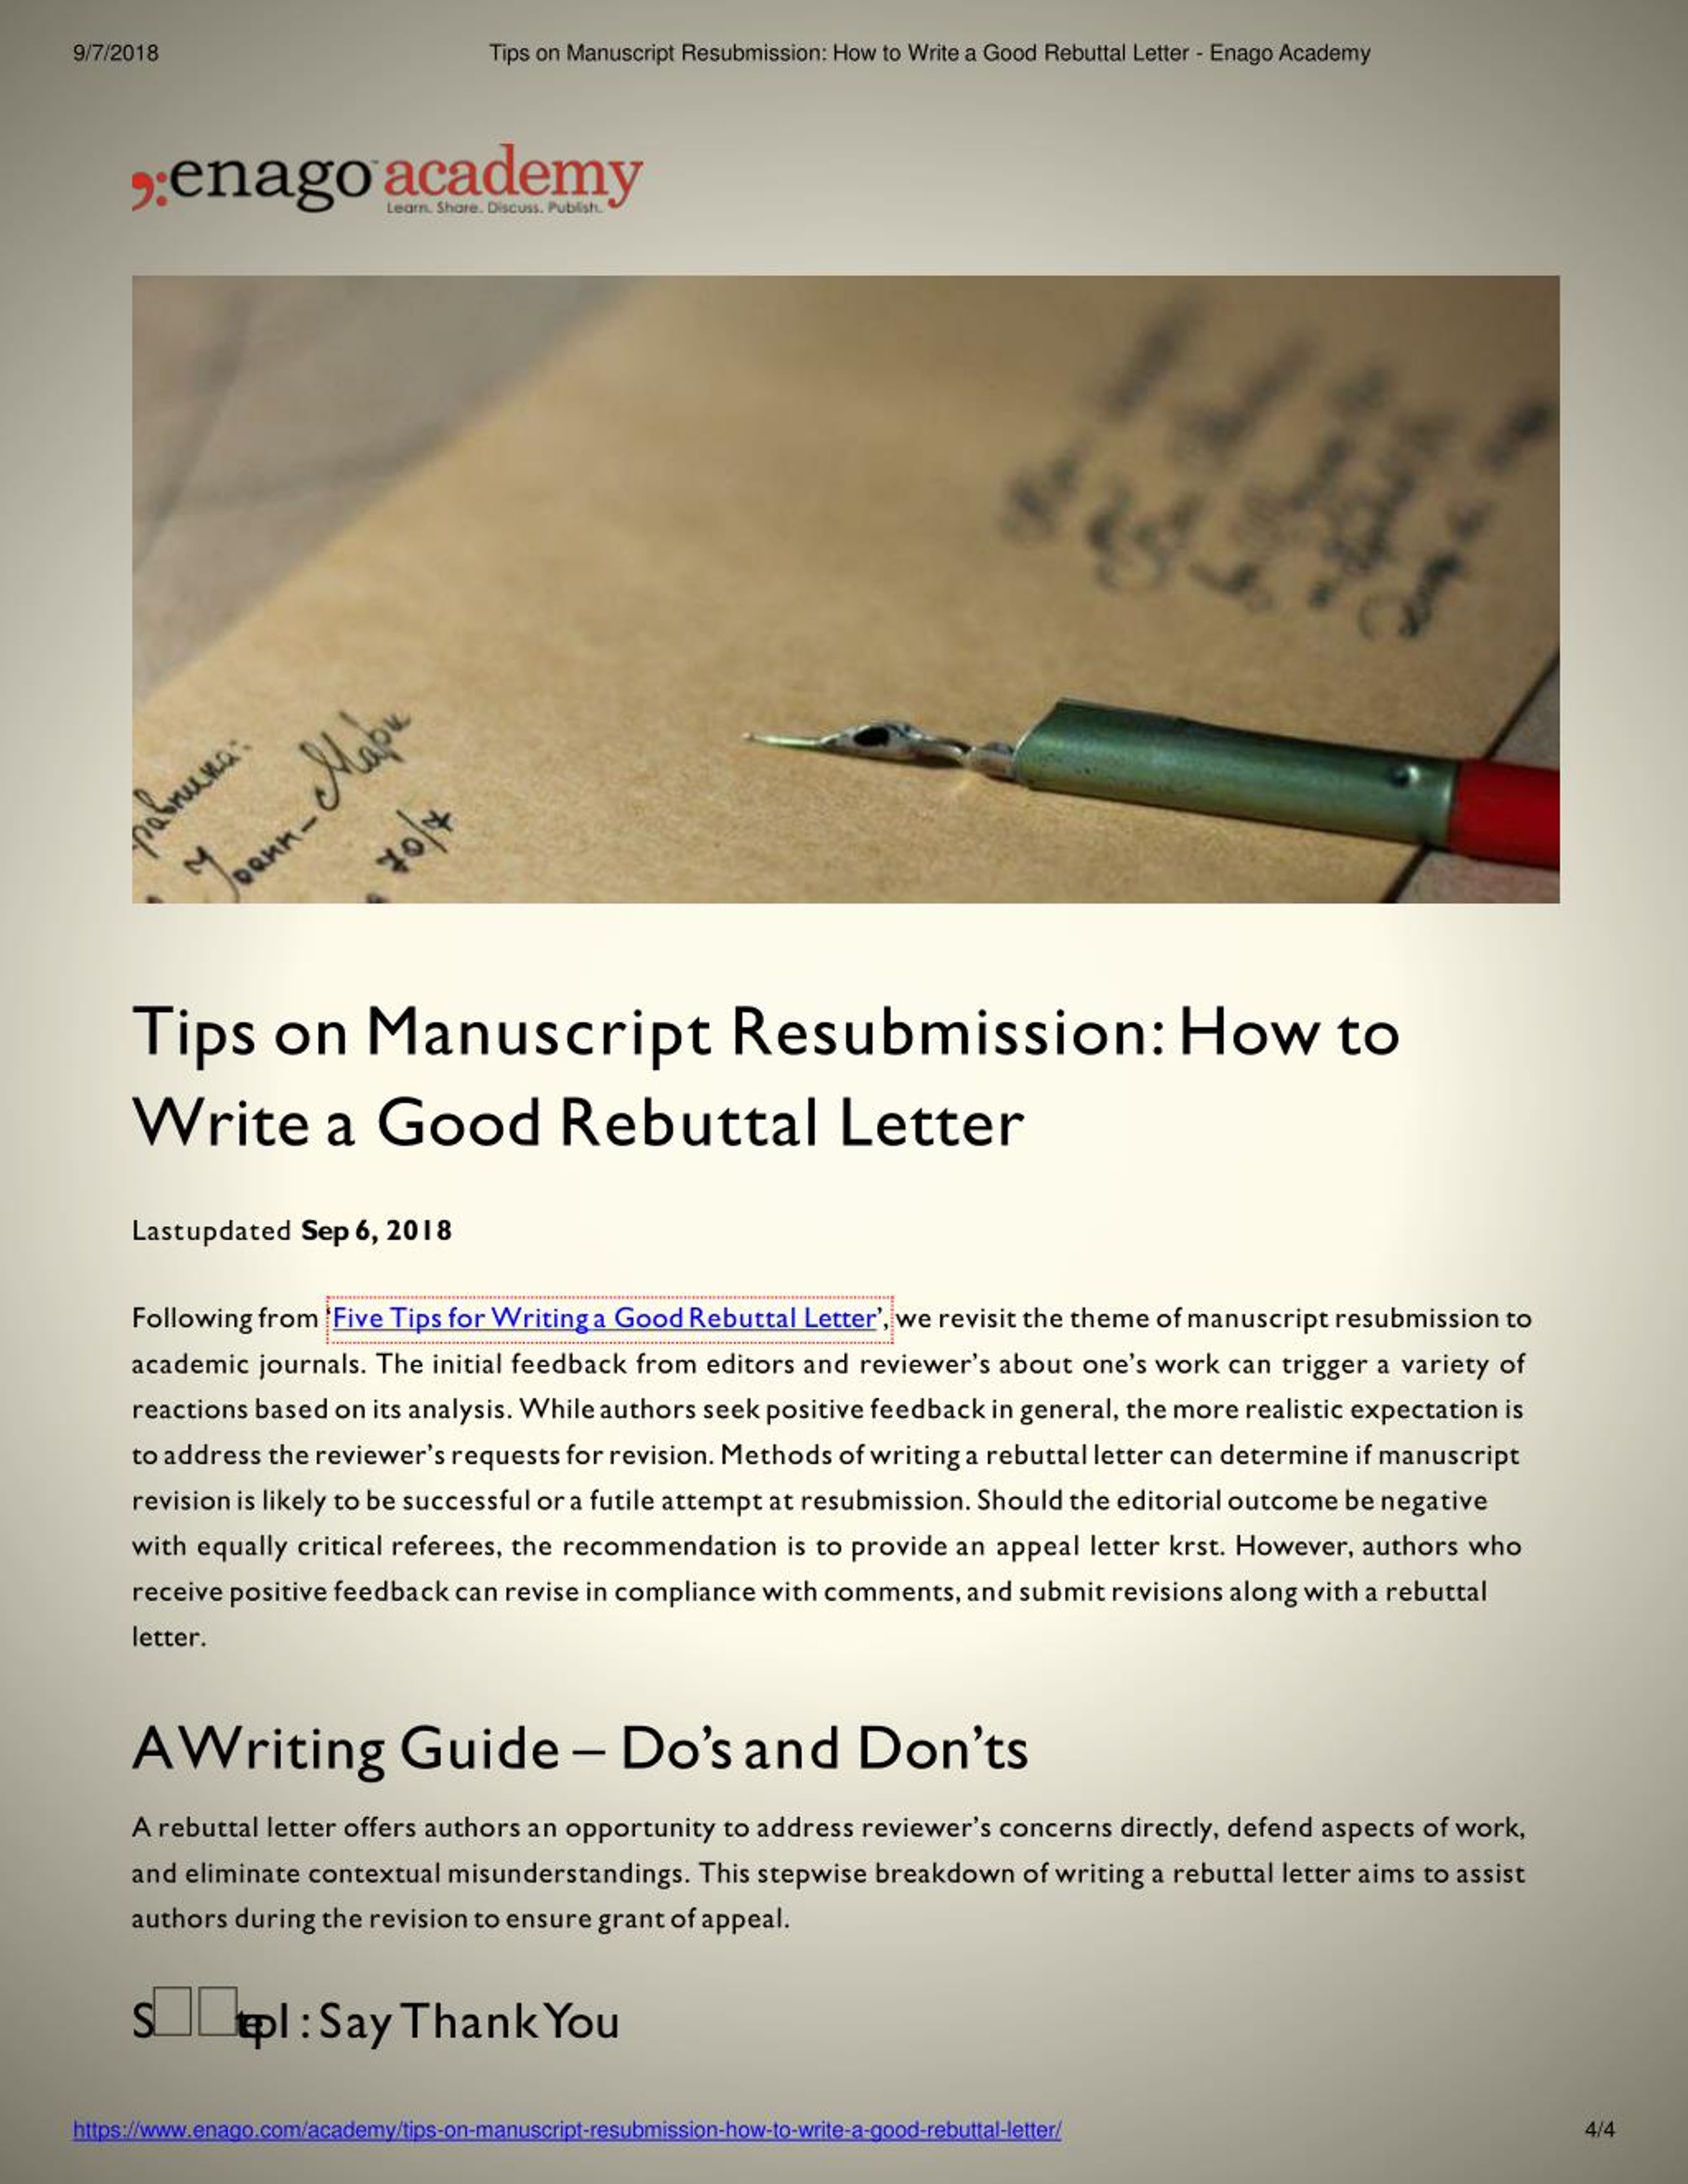 PPT - Tips on Manuscript Resubmission_ How to Write a Good